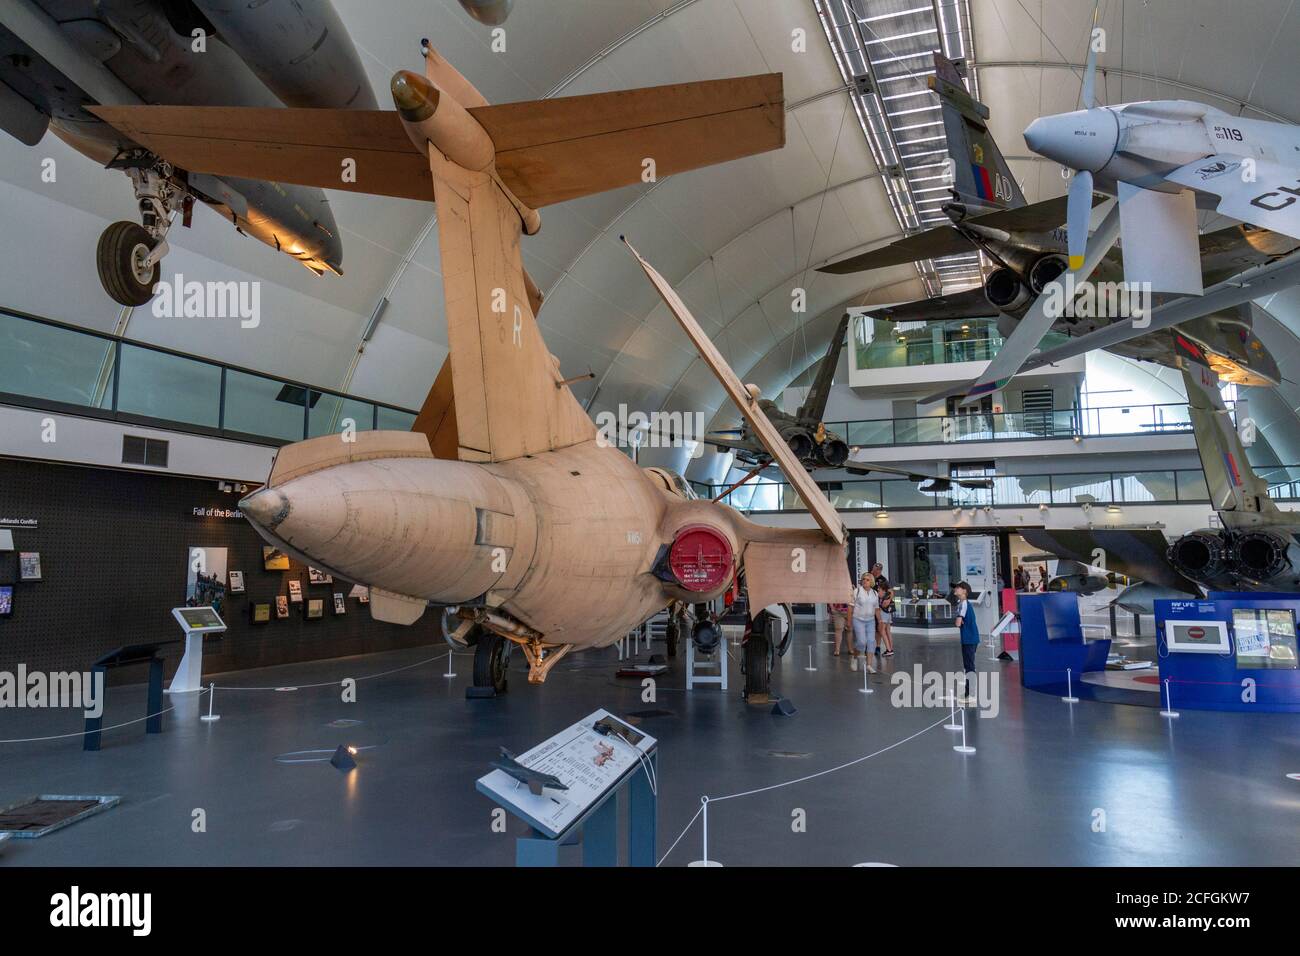 General view of modern military aircraft on display in the RAF Museum, London, UK. Stock Photo